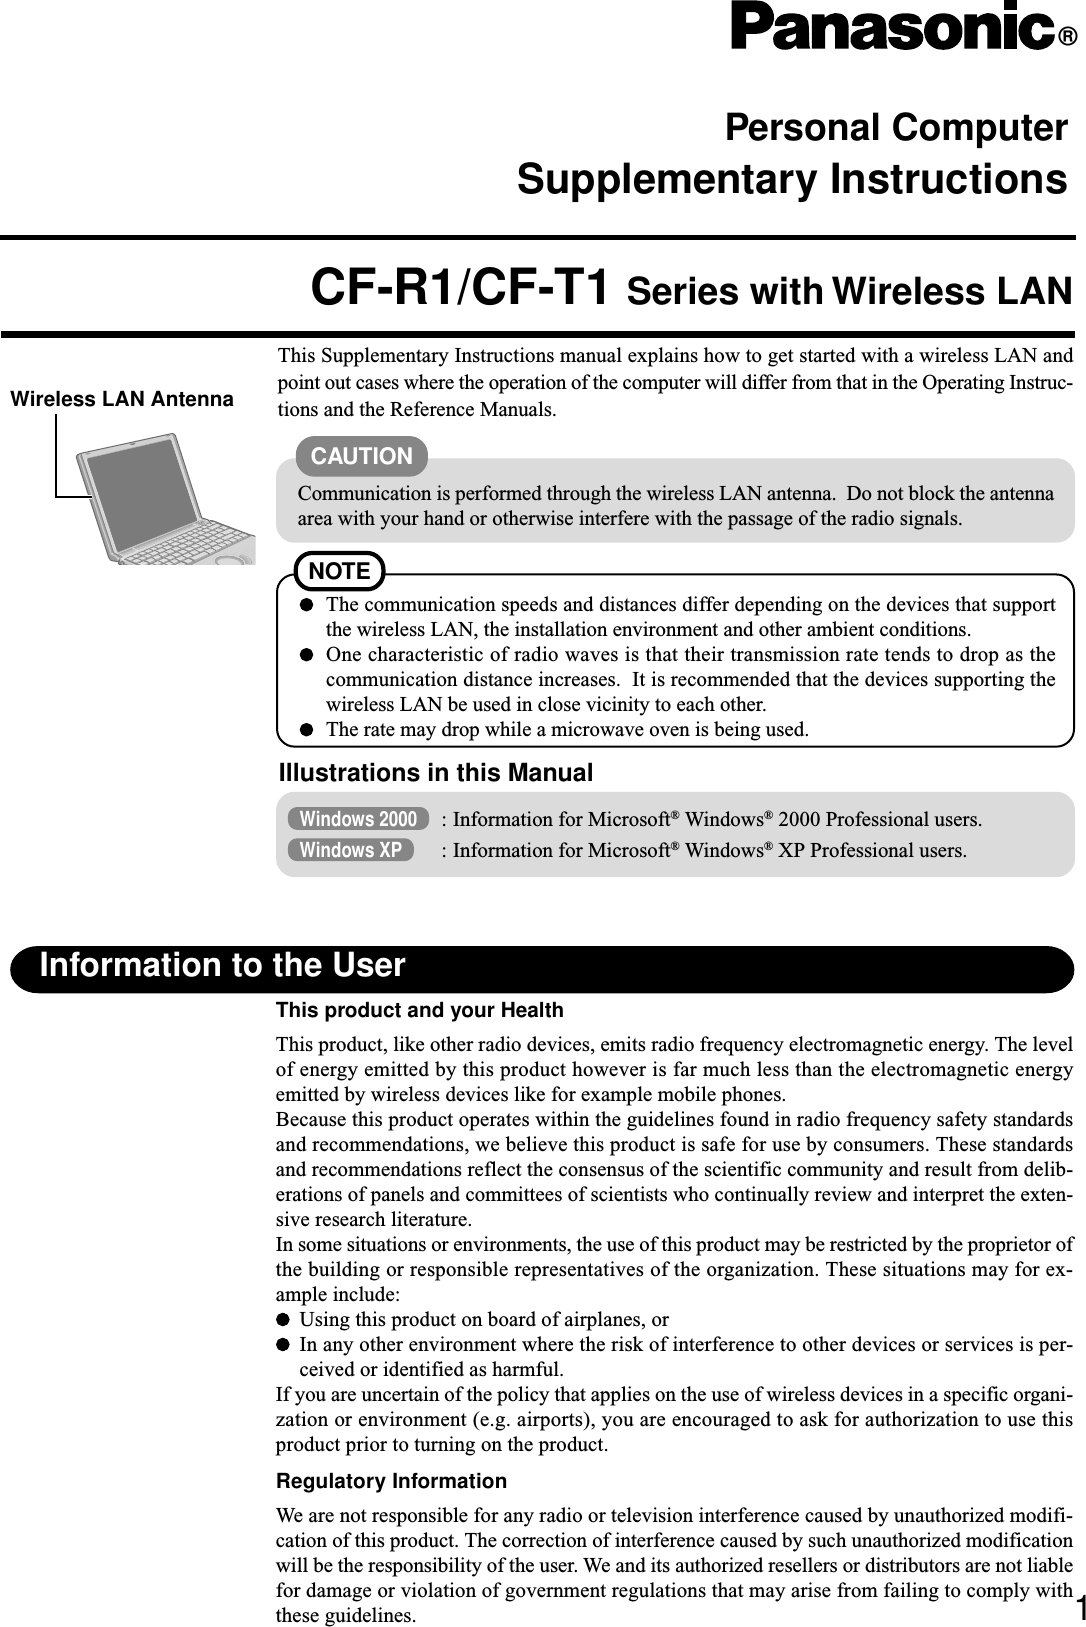 Personal ComputerSupplementary Instructions®This Supplementary Instructions manual explains how to get started with a wireless LAN andpoint out cases where the operation of the computer will differ from that in the Operating Instruc-tions and the Reference Manuals.CF-R1/CF-T1 Series with Wireless LAN1Information to the UserThis product and your HealthThis product, like other radio devices, emits radio frequency electromagnetic energy. The levelof energy emitted by this product however is far much less than the electromagnetic energyemitted by wireless devices like for example mobile phones.Because this product operates within the guidelines found in radio frequency safety standardsand recommendations, we believe this product is safe for use by consumers. These standardsand recommendations reflect the consensus of the scientific community and result from delib-erations of panels and committees of scientists who continually review and interpret the exten-sive research literature.In some situations or environments, the use of this product may be restricted by the proprietor ofthe building or responsible representatives of the organization. These situations may for ex-ample include:Using this product on board of airplanes, orIn any other environment where the risk of interference to other devices or services is per-ceived or identified as harmful.If you are uncertain of the policy that applies on the use of wireless devices in a specific organi-zation or environment (e.g. airports), you are encouraged to ask for authorization to use thisproduct prior to turning on the product.Regulatory InformationWe are not responsible for any radio or television interference caused by unauthorized modifi-cation of this product. The correction of interference caused by such unauthorized modificationwill be the responsibility of the user. We and its authorized resellers or distributors are not liablefor damage or violation of government regulations that may arise from failing to comply withthese guidelines.Illustrations in this ManualWindows 2000 : Information for Microsoft® Windows® 2000 Professional users.Windows XP : Information for Microsoft® Windows® XP Professional users.Communication is performed through the wireless LAN antenna.  Do not block the antennaarea with your hand or otherwise interfere with the passage of the radio signals.CAUTIONNOTEThe communication speeds and distances differ depending on the devices that supportthe wireless LAN, the installation environment and other ambient conditions.One characteristic of radio waves is that their transmission rate tends to drop as thecommunication distance increases.  It is recommended that the devices supporting thewireless LAN be used in close vicinity to each other.The rate may drop while a microwave oven is being used.Wireless LAN Antenna